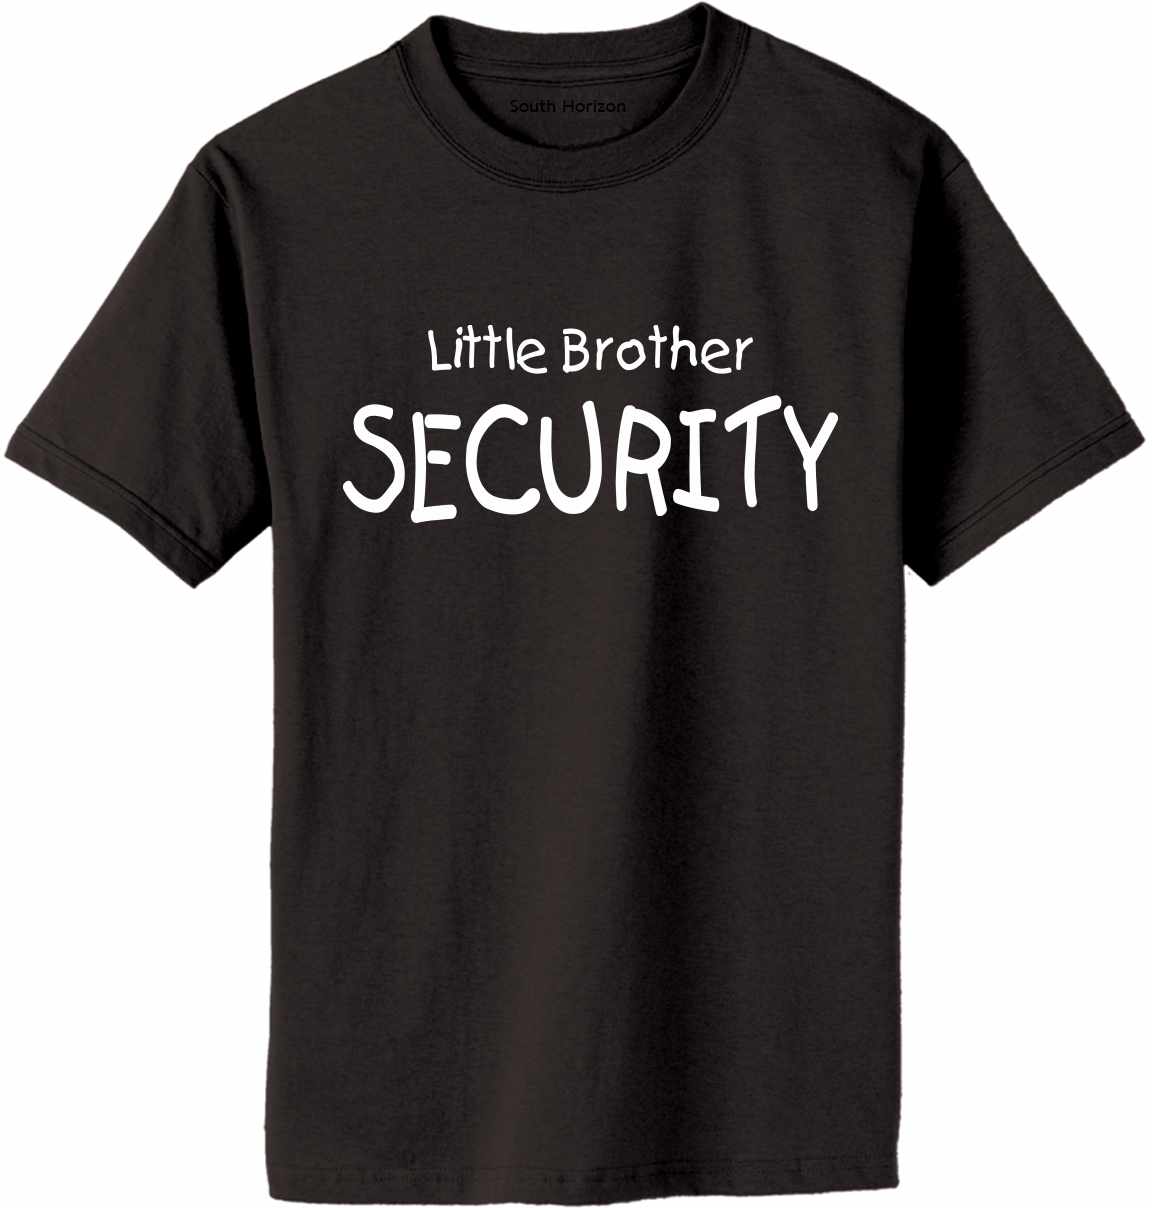 Little Brother Security Adult T-Shirt (#972-1)